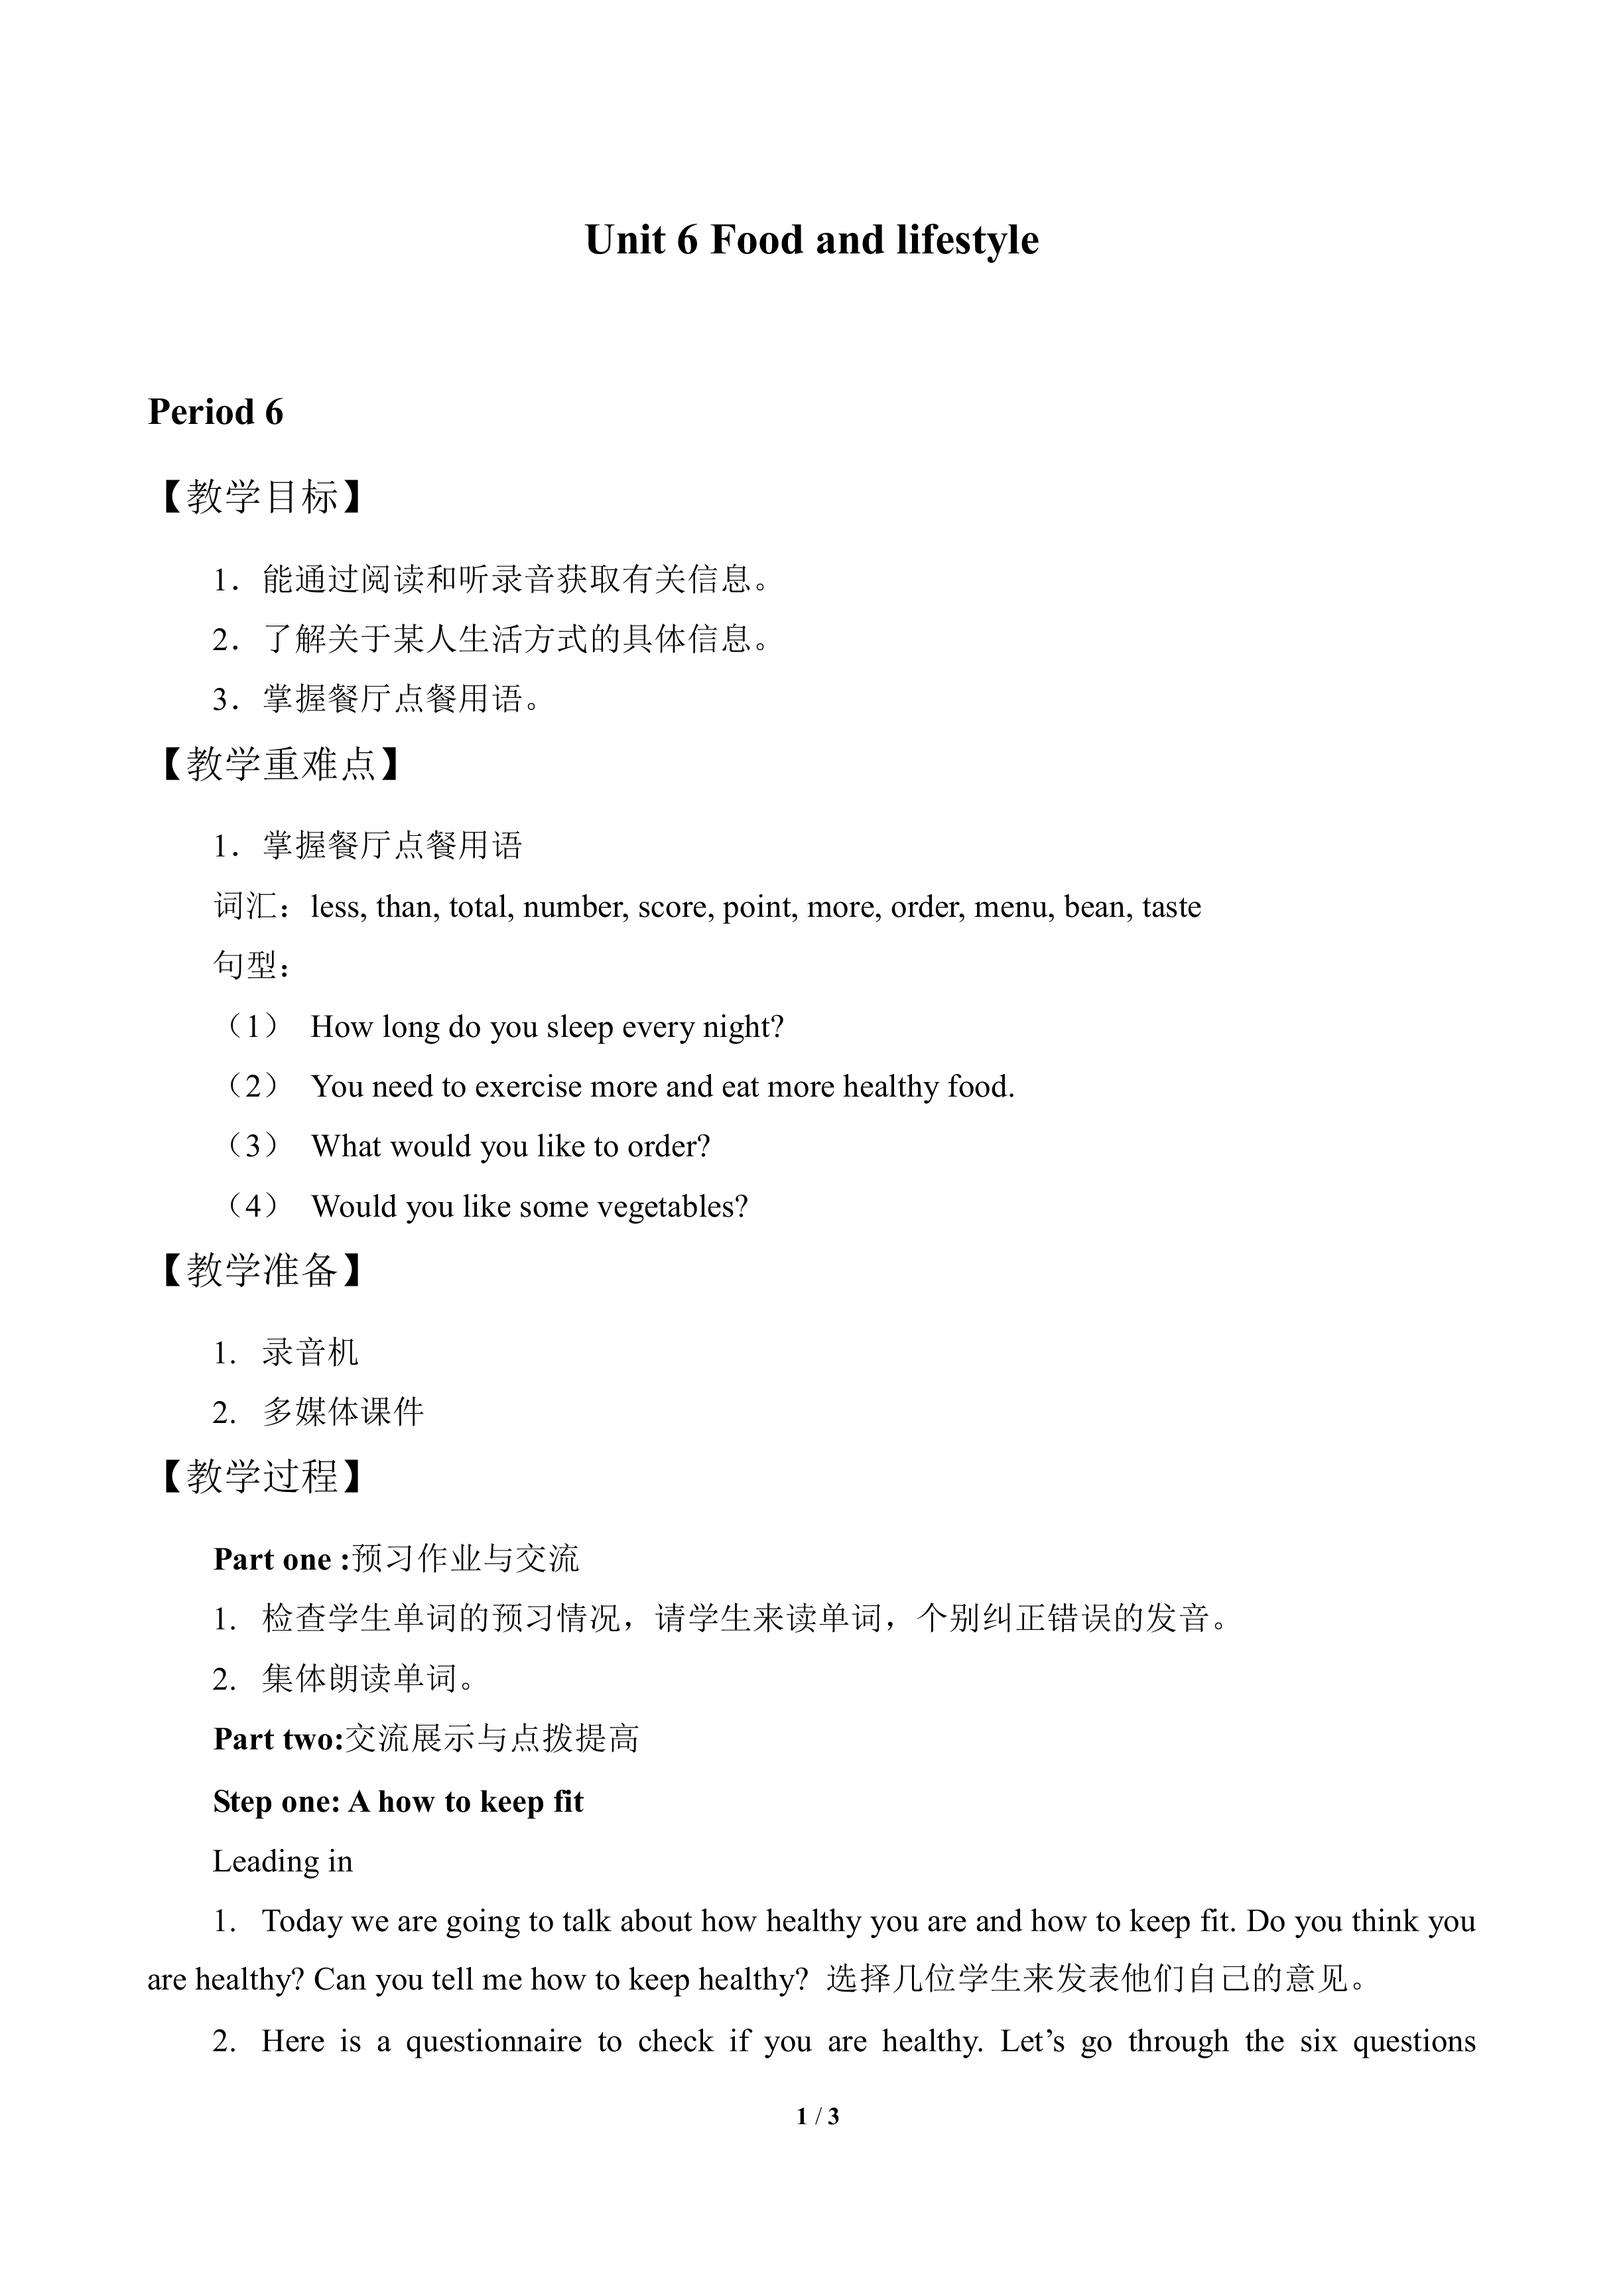 Unit 6 Food and lifestyle_教案3